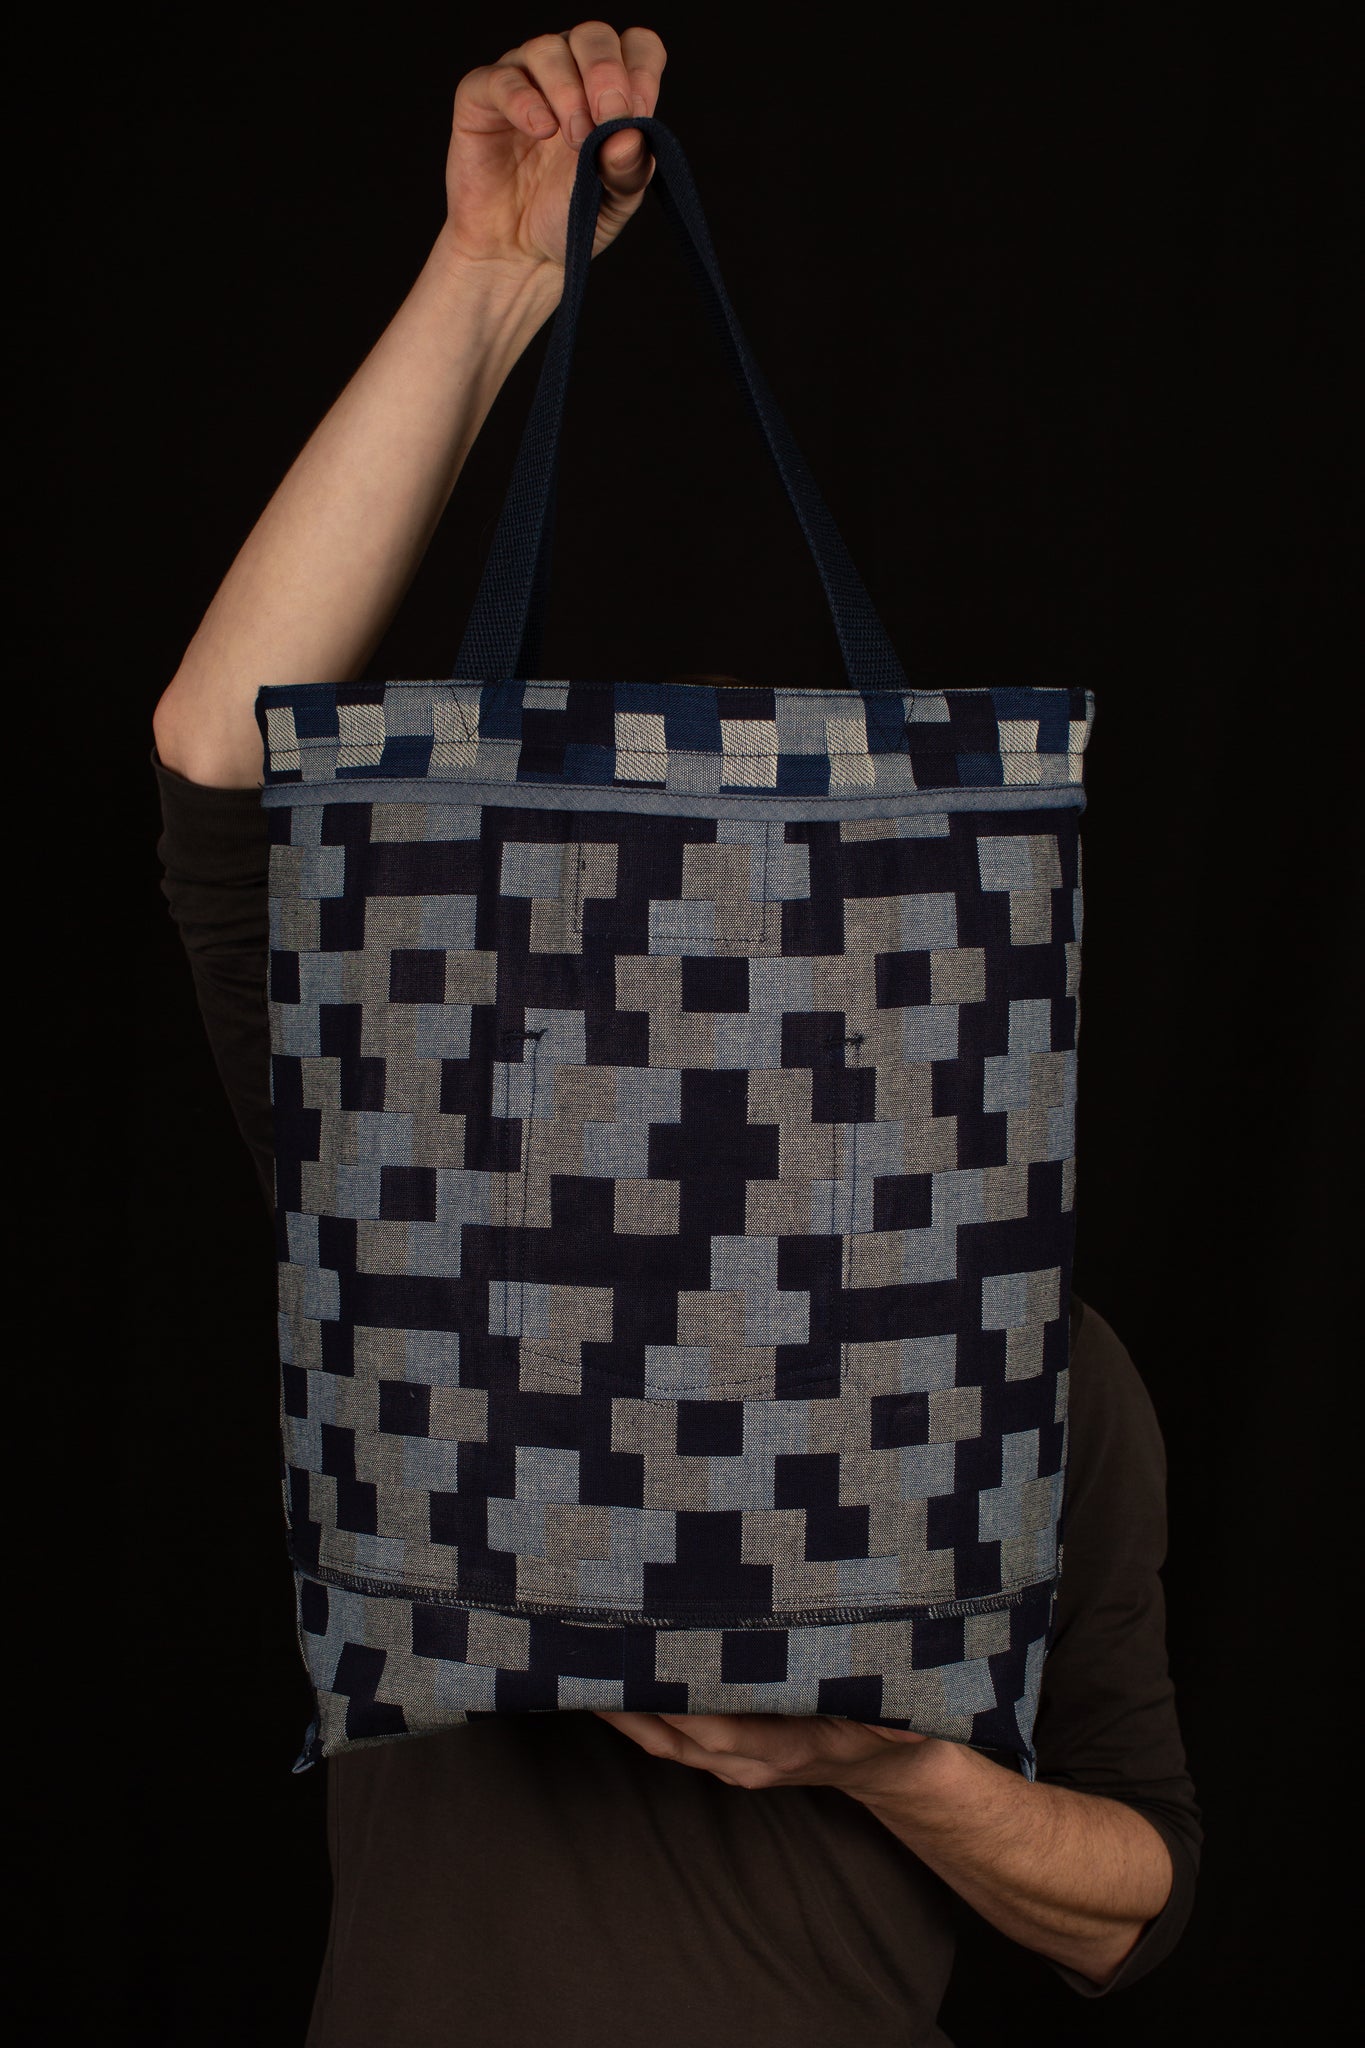 The Jacquard Tote Bag Collection